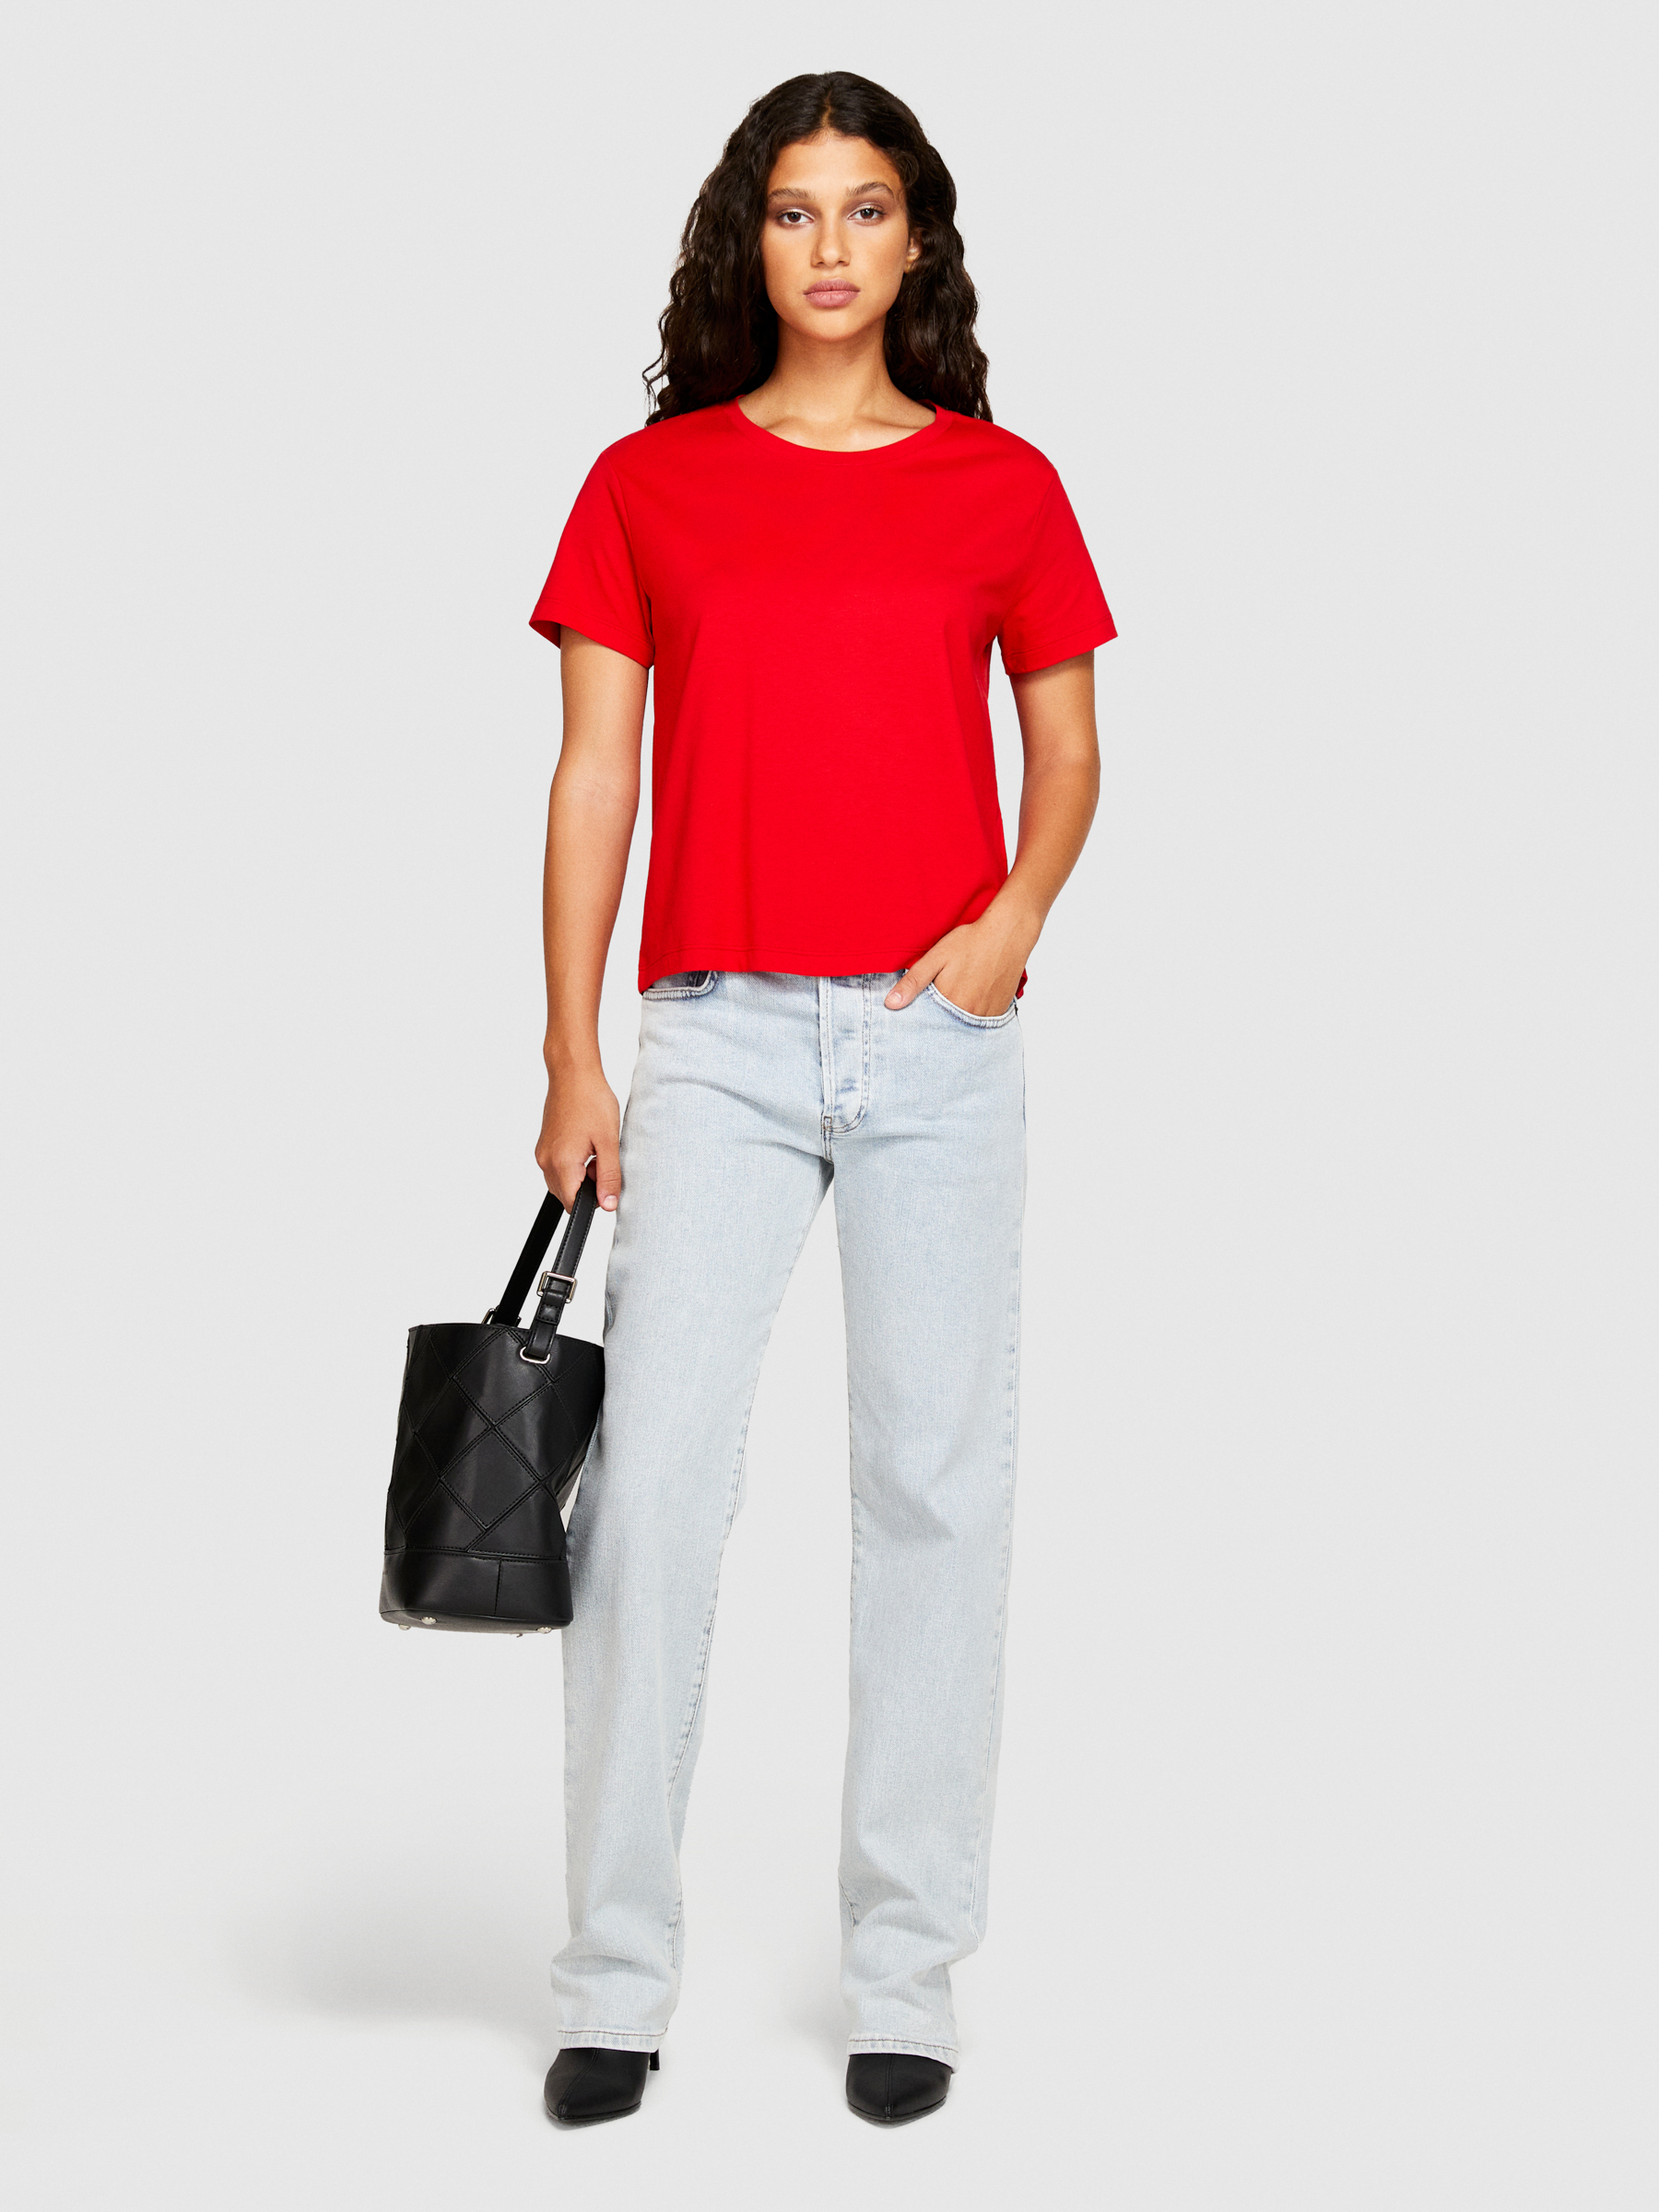 Sisley - Solid Color Boxy Fit T-shirt, Woman, Red, Size: L